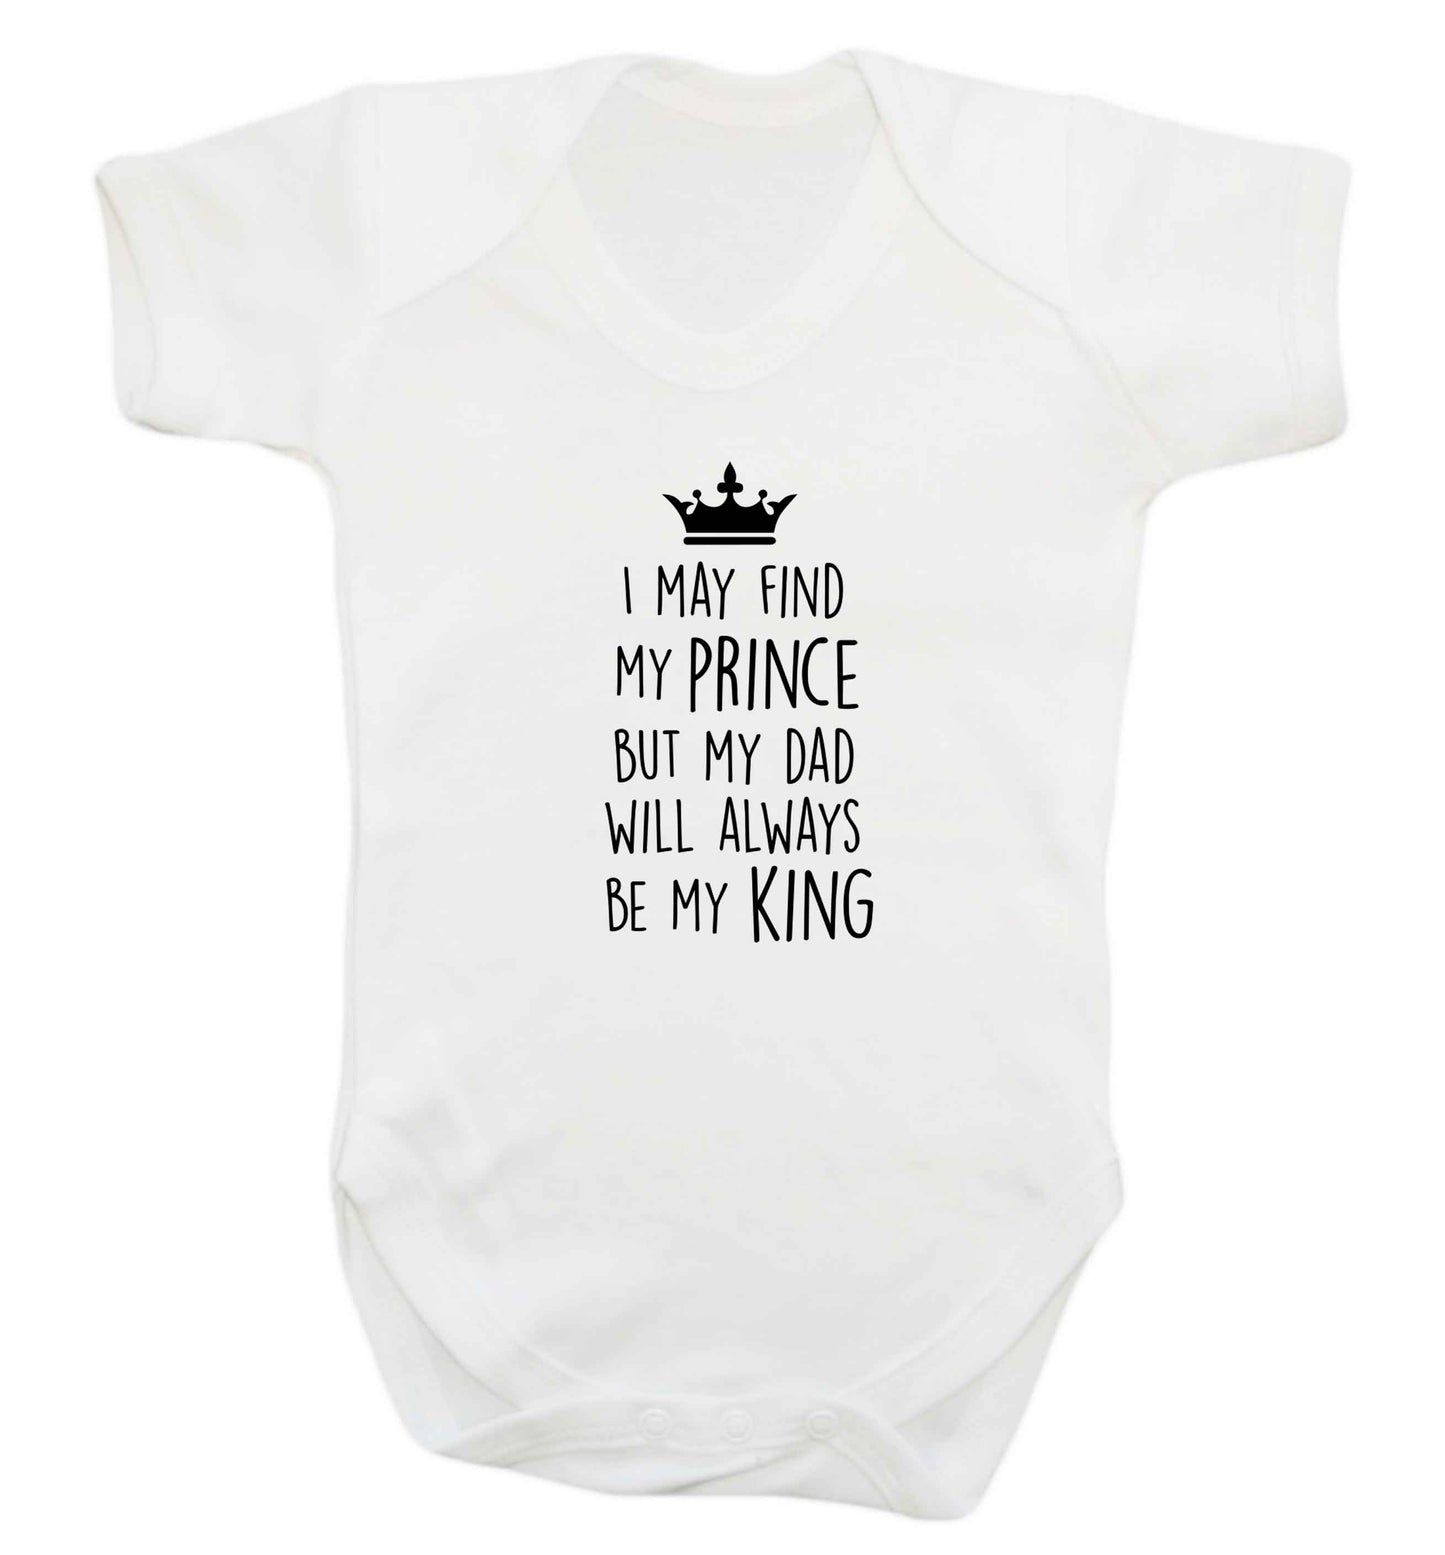 I may find my prince but my dad will always be my king baby vest white 18-24 months